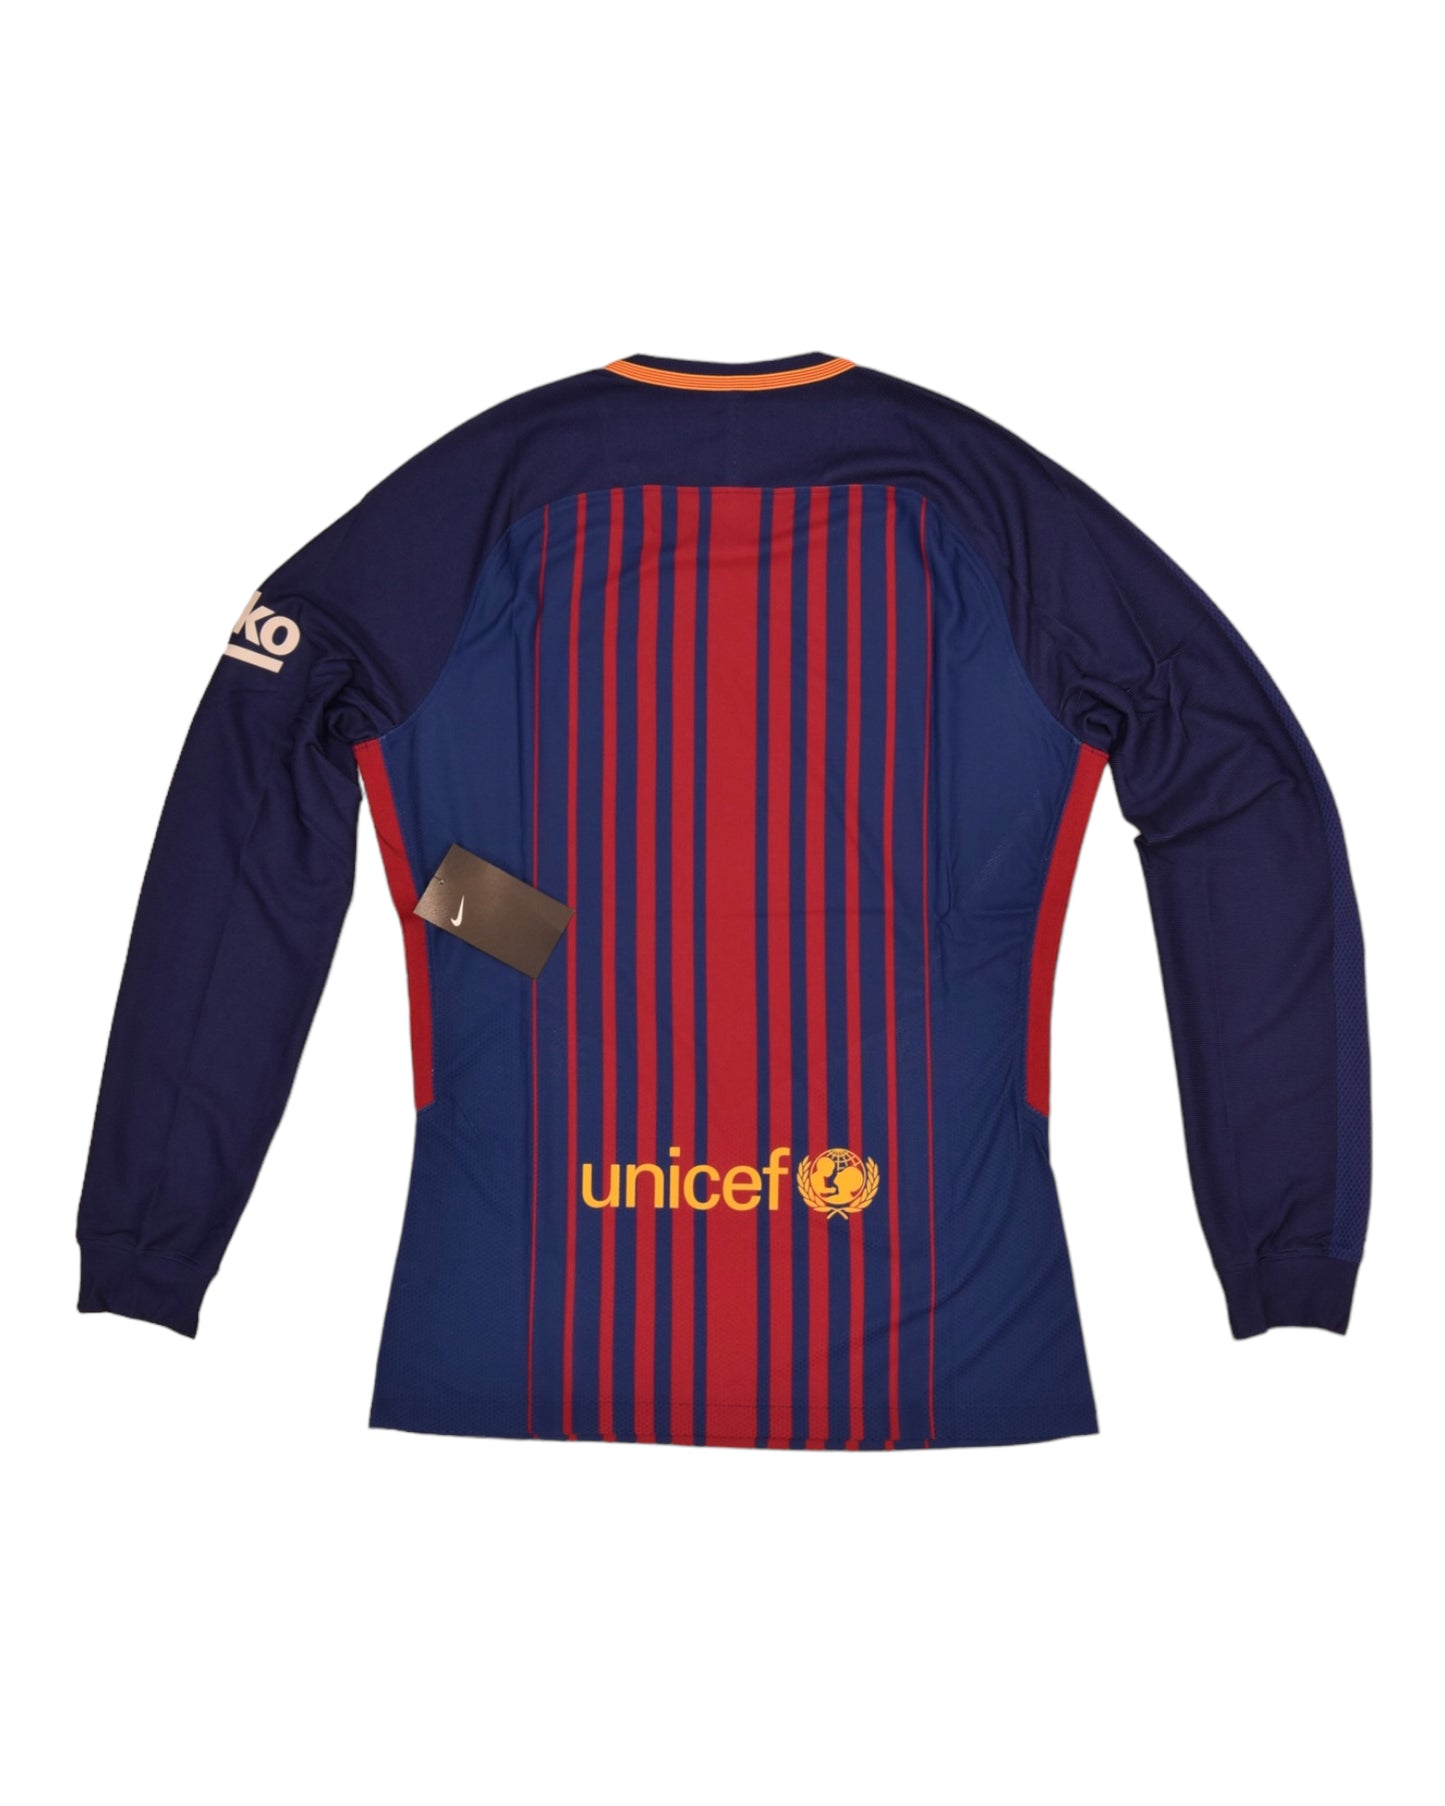 Authentic New FC Barcelona Nike Aeroswift 2016 - 2017 Player's Issue / Edition Away Football Deadstock BNWT Long Sleeve Shirt Size M Unicef Beko Long Sleeves